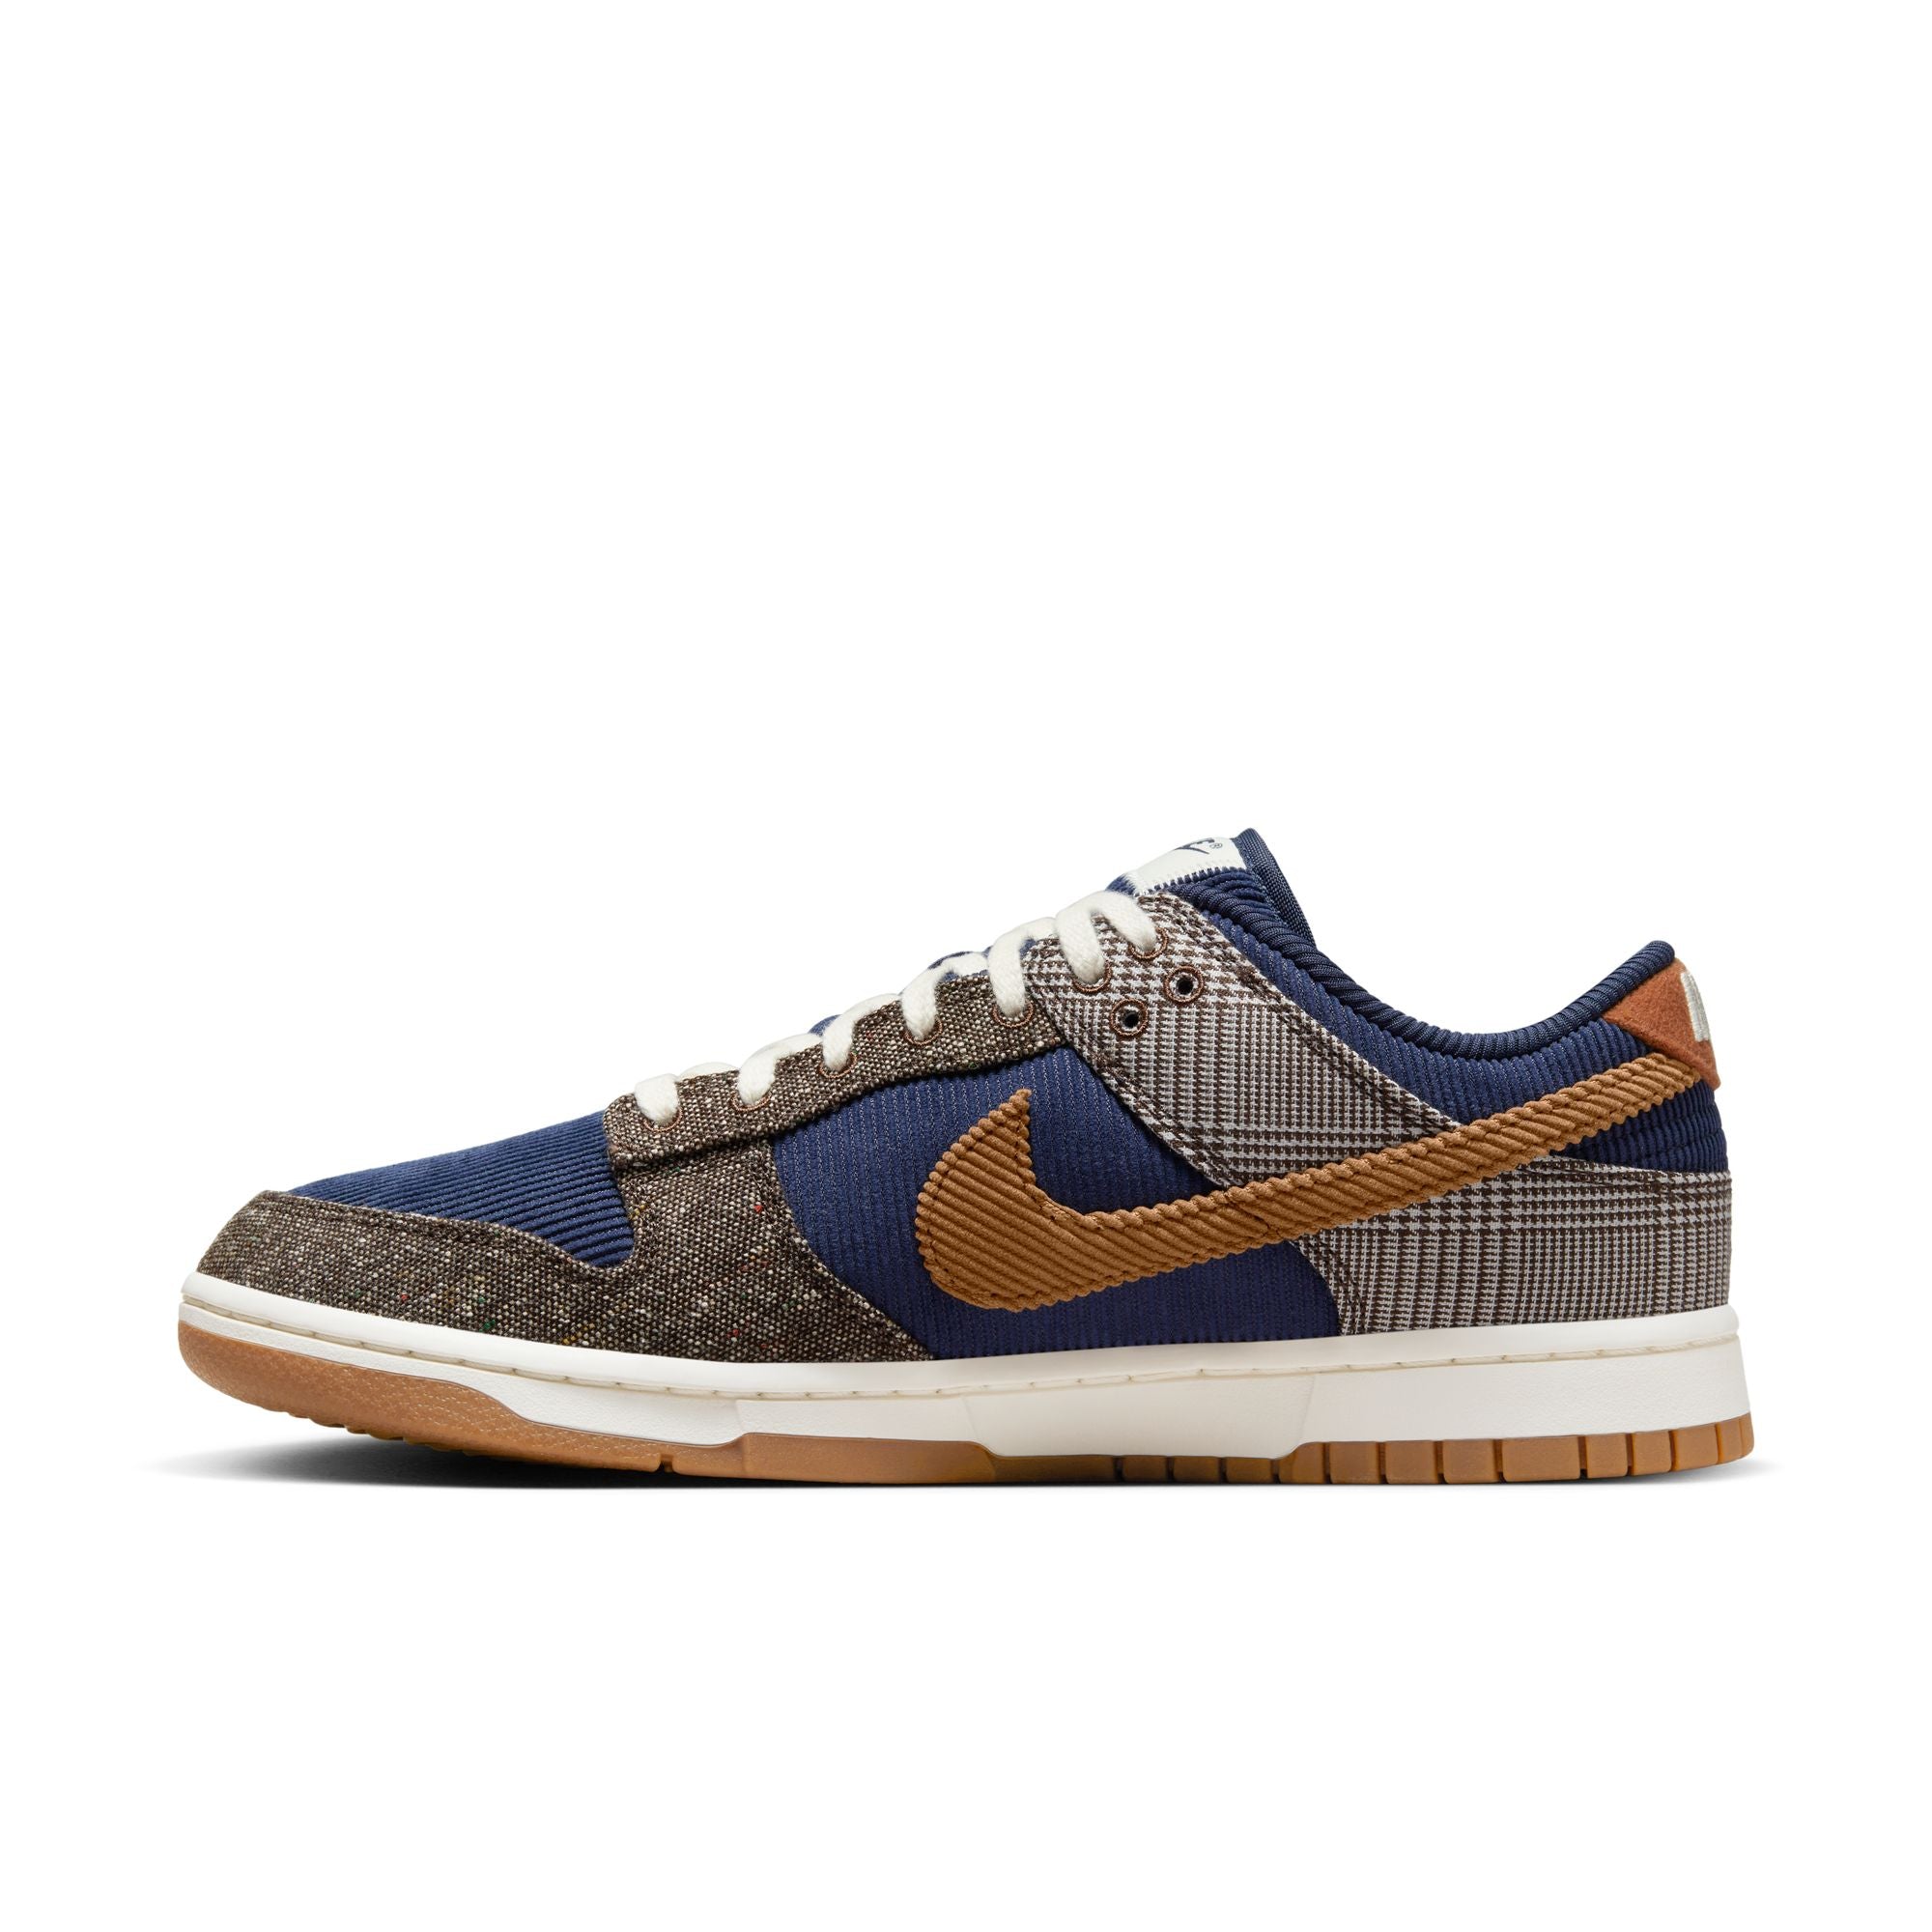 Dunk Low PRM Midnight Navy and White